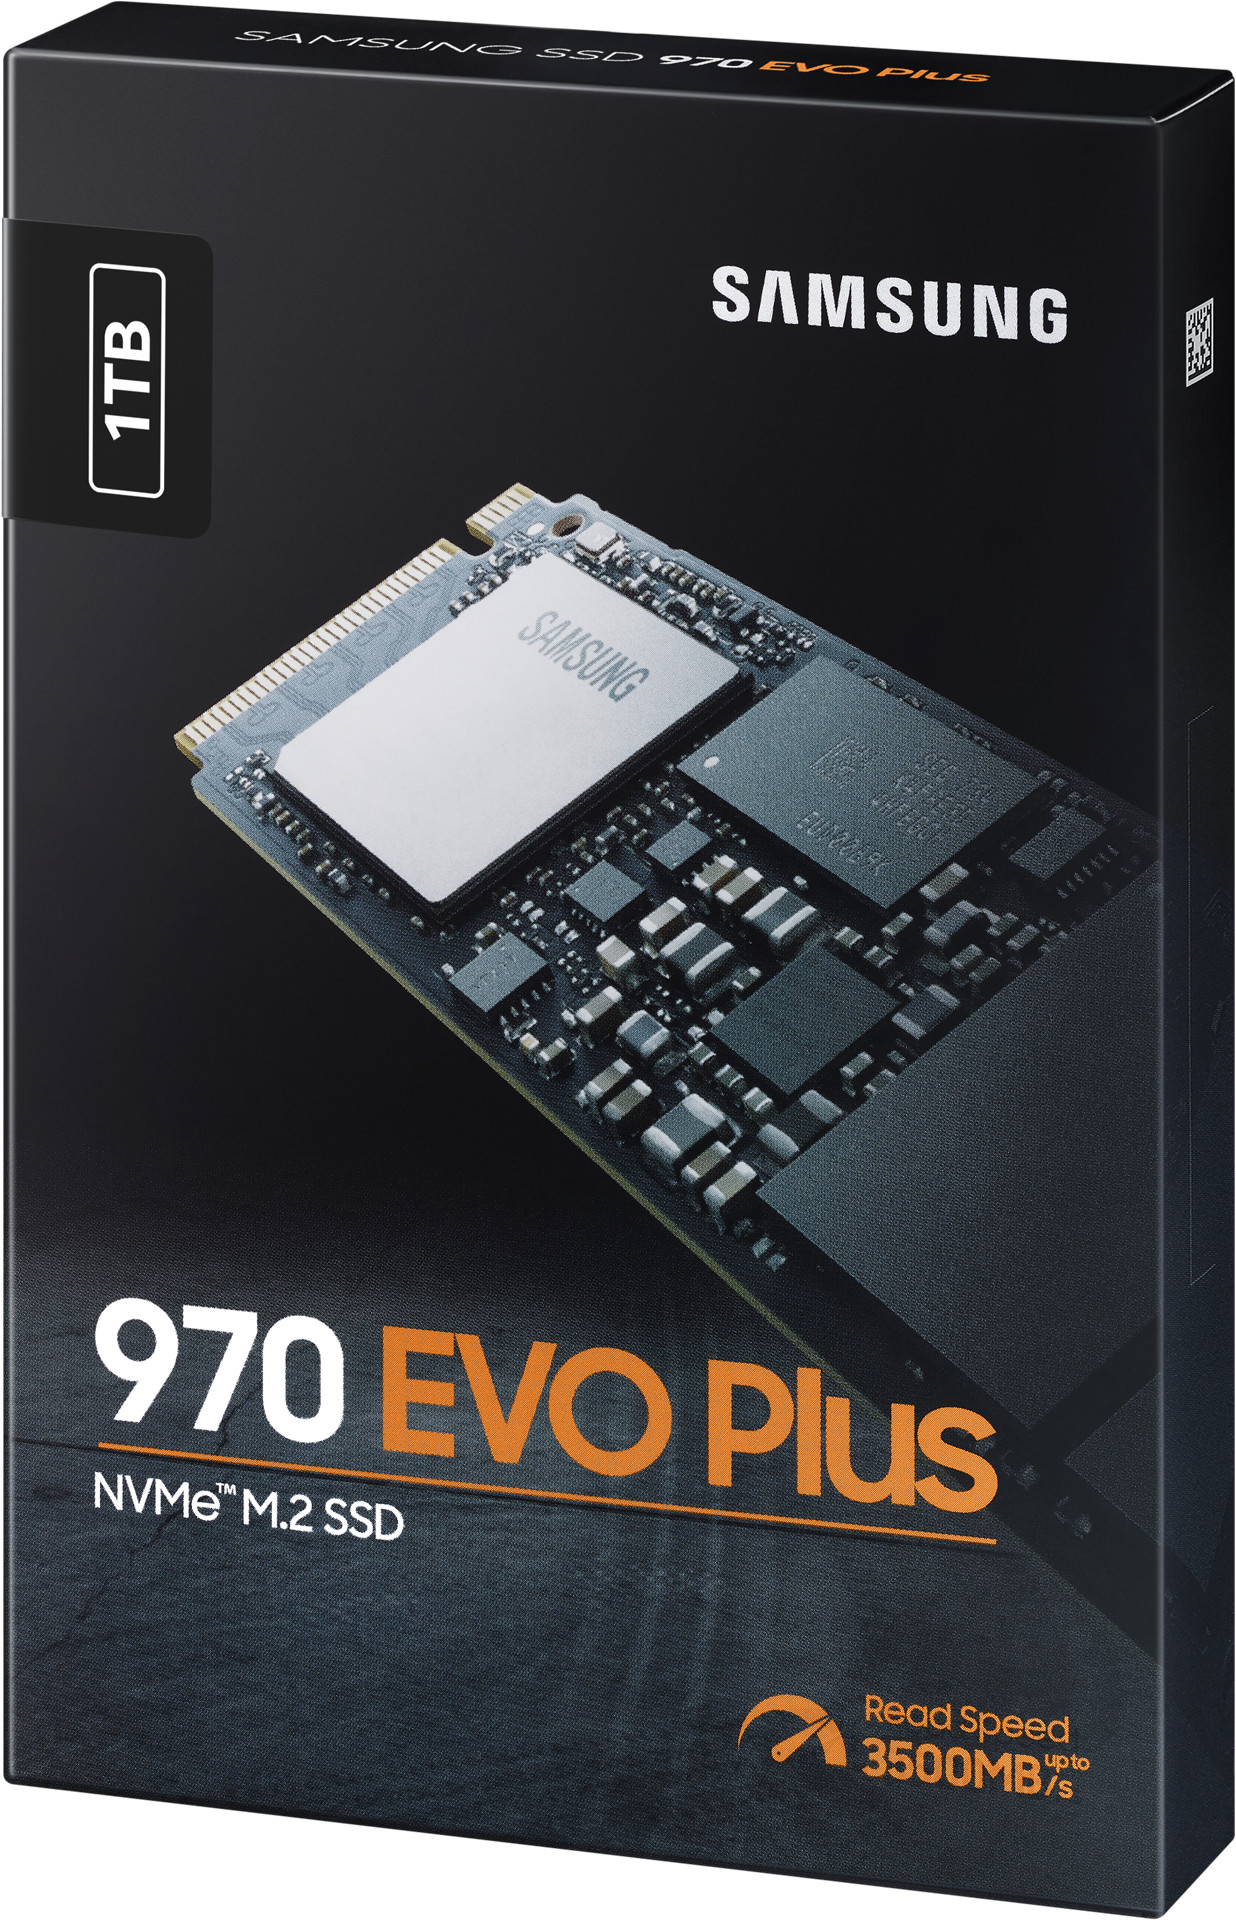 Disque Ssd Interne 970 Evo Plus 1to M.2 - Mz-v7s1t0bw - Disque dur interne  BUT